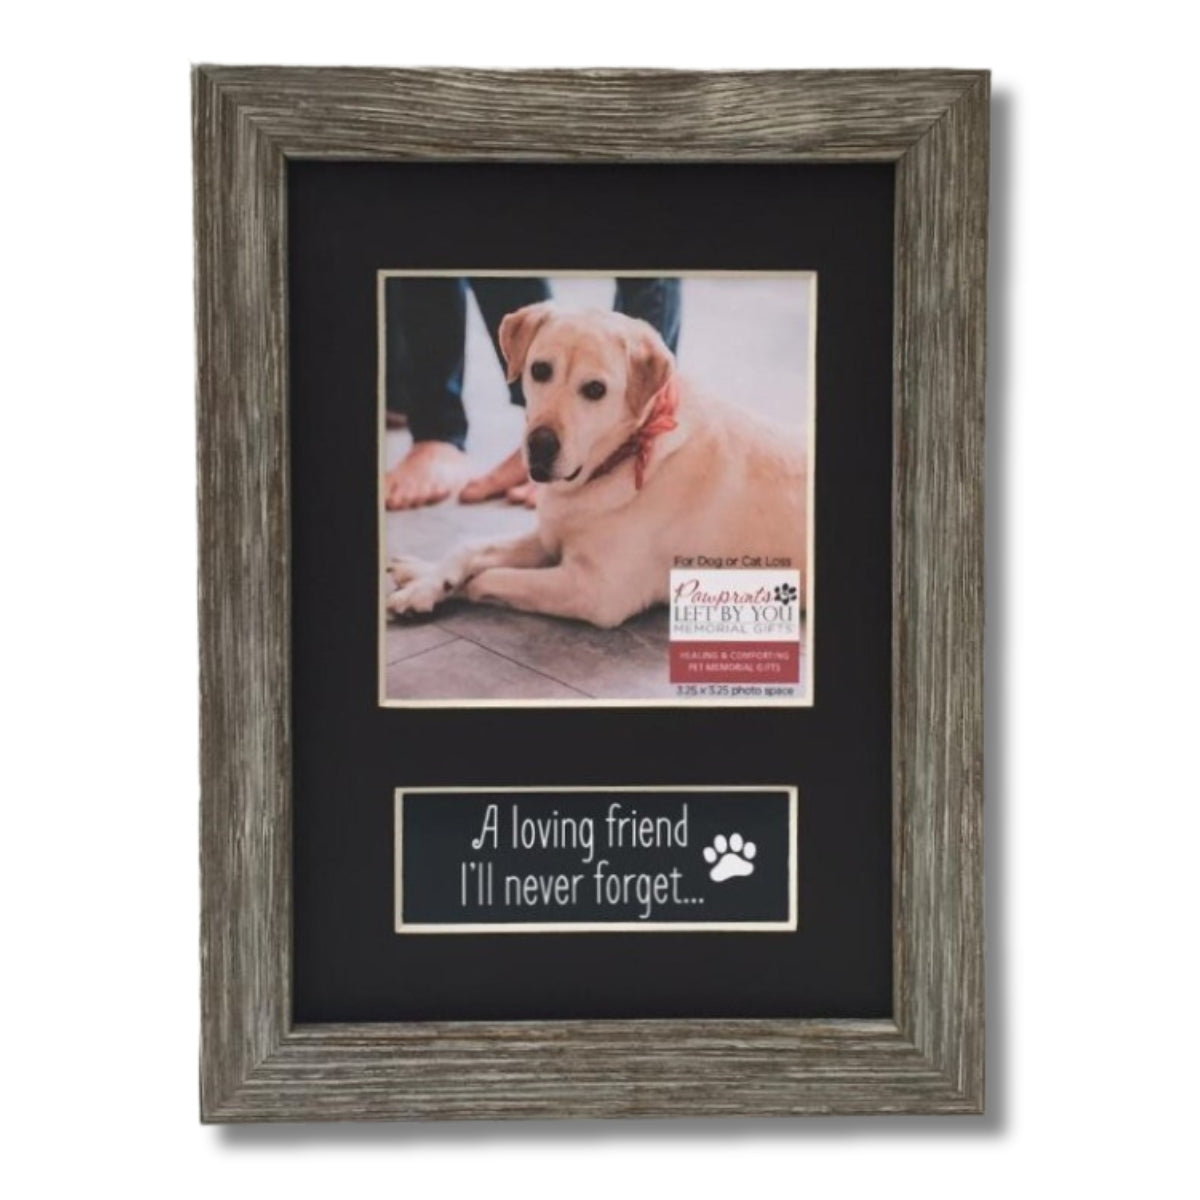 Pet memorial 5x7 real wood farmhouse photo frame with a black mat with openings for a 3.25" square photo and A Loving Friend sentiment